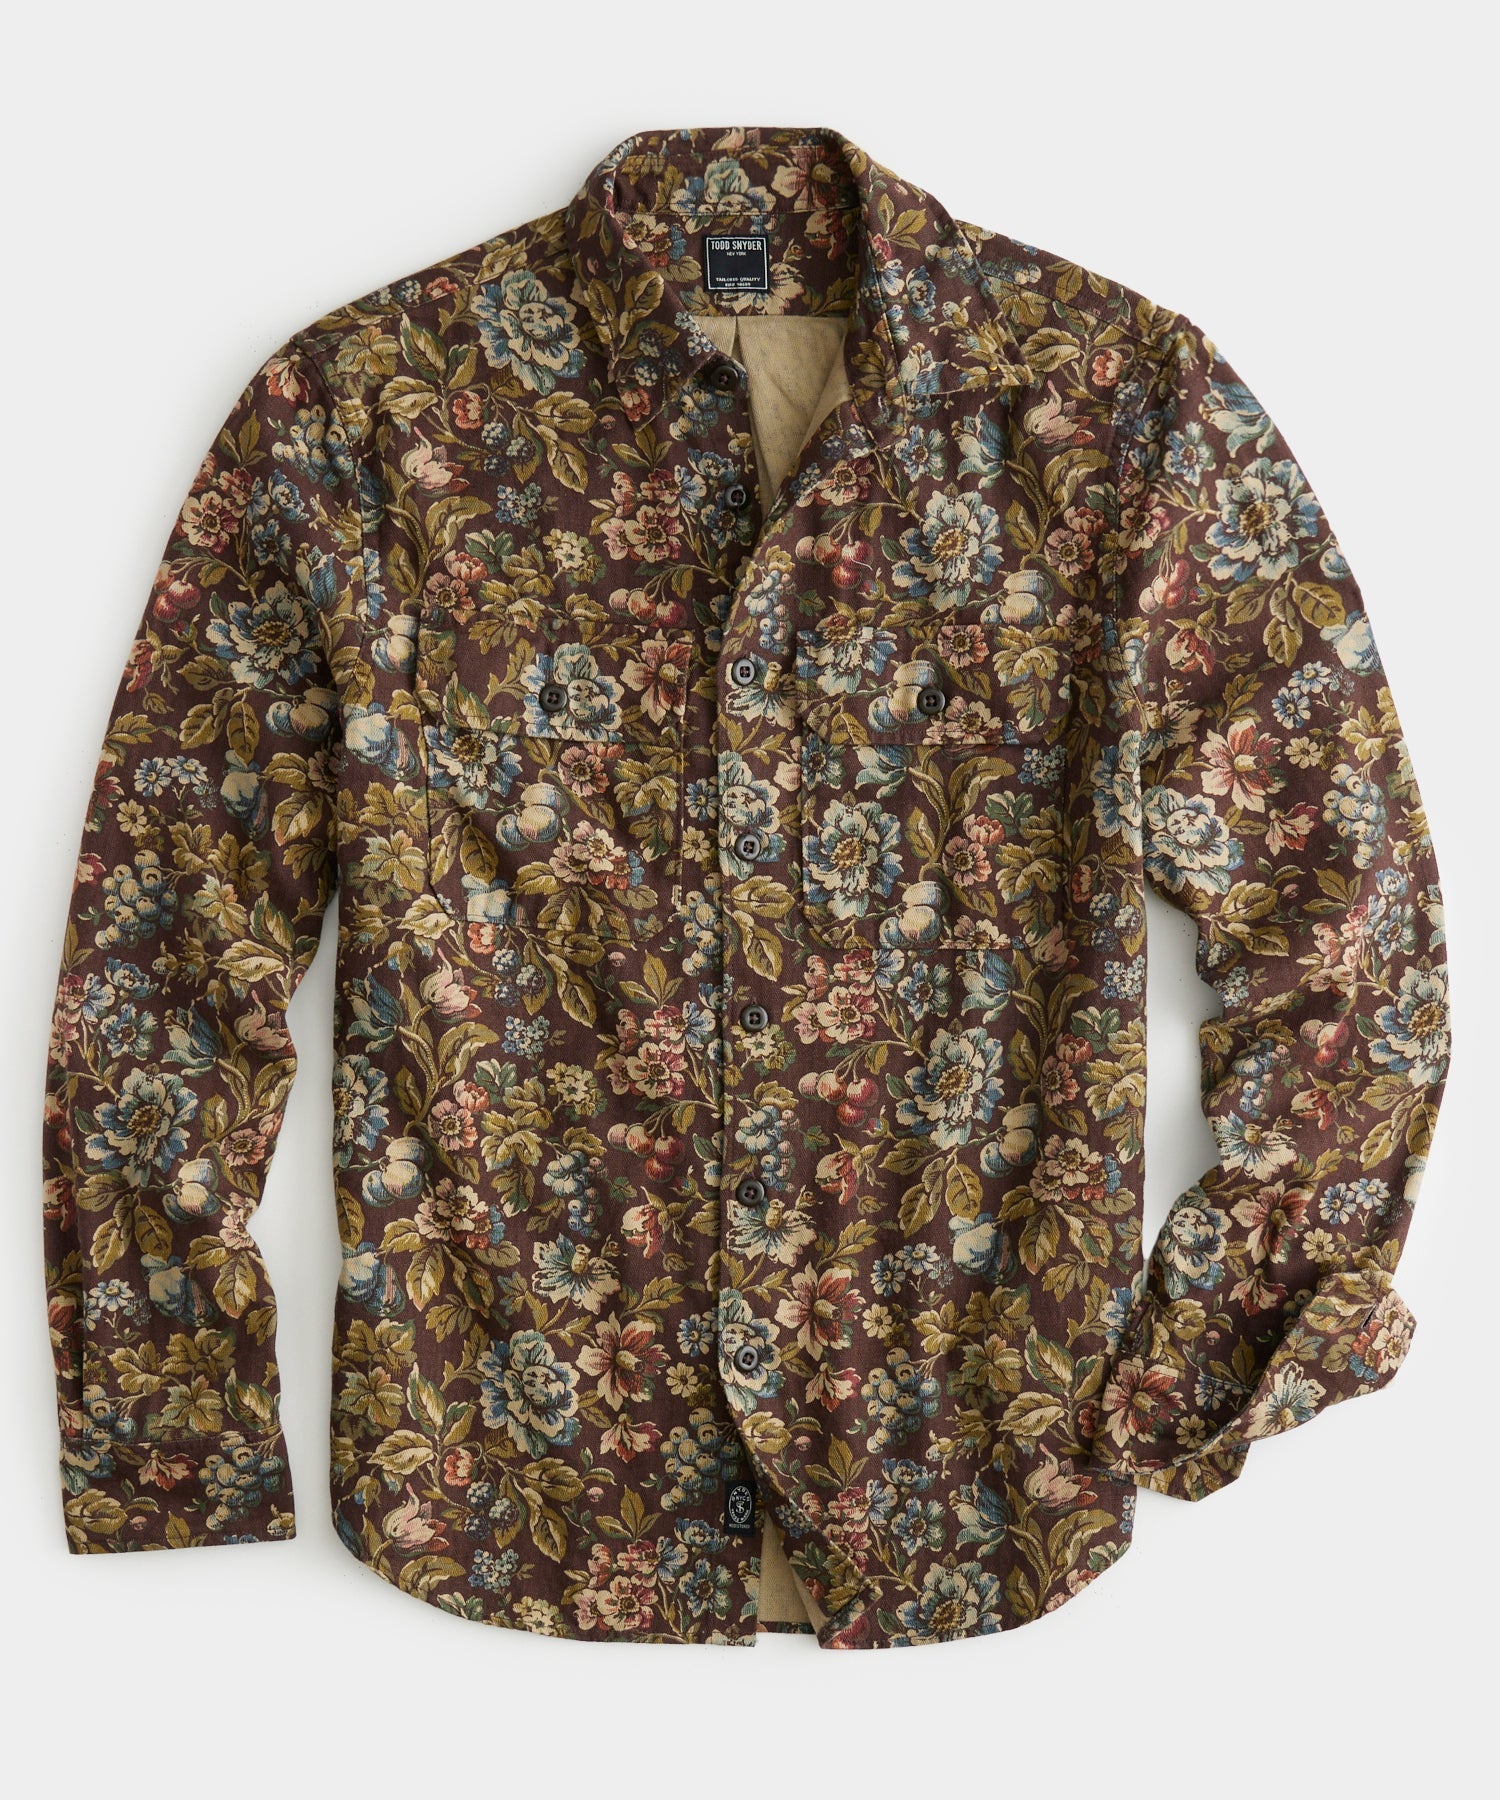 Todd Snyder - TODD SNYDER TWO POCKET OVERSHIRT IN BURGUNDY FLORAL - Rent With Thred